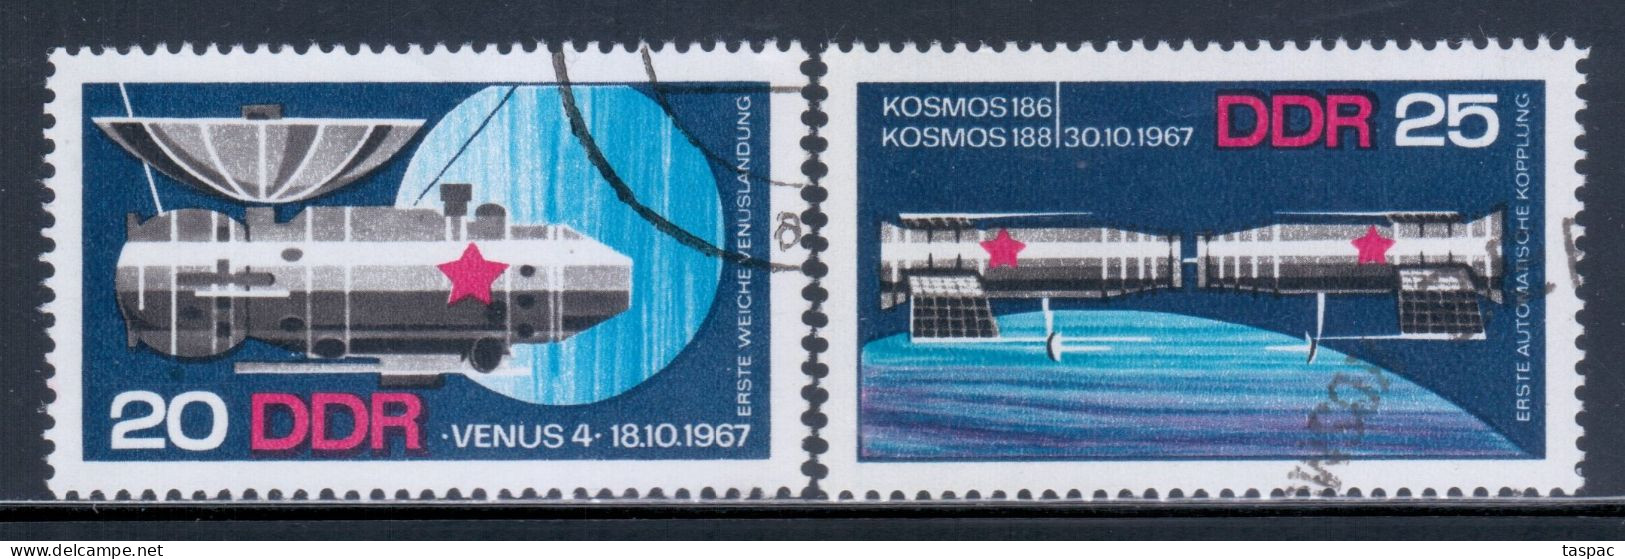 East Germany / DDR 1968 Mi# 1341-1342 Used - Russian Space Explorations - Europe